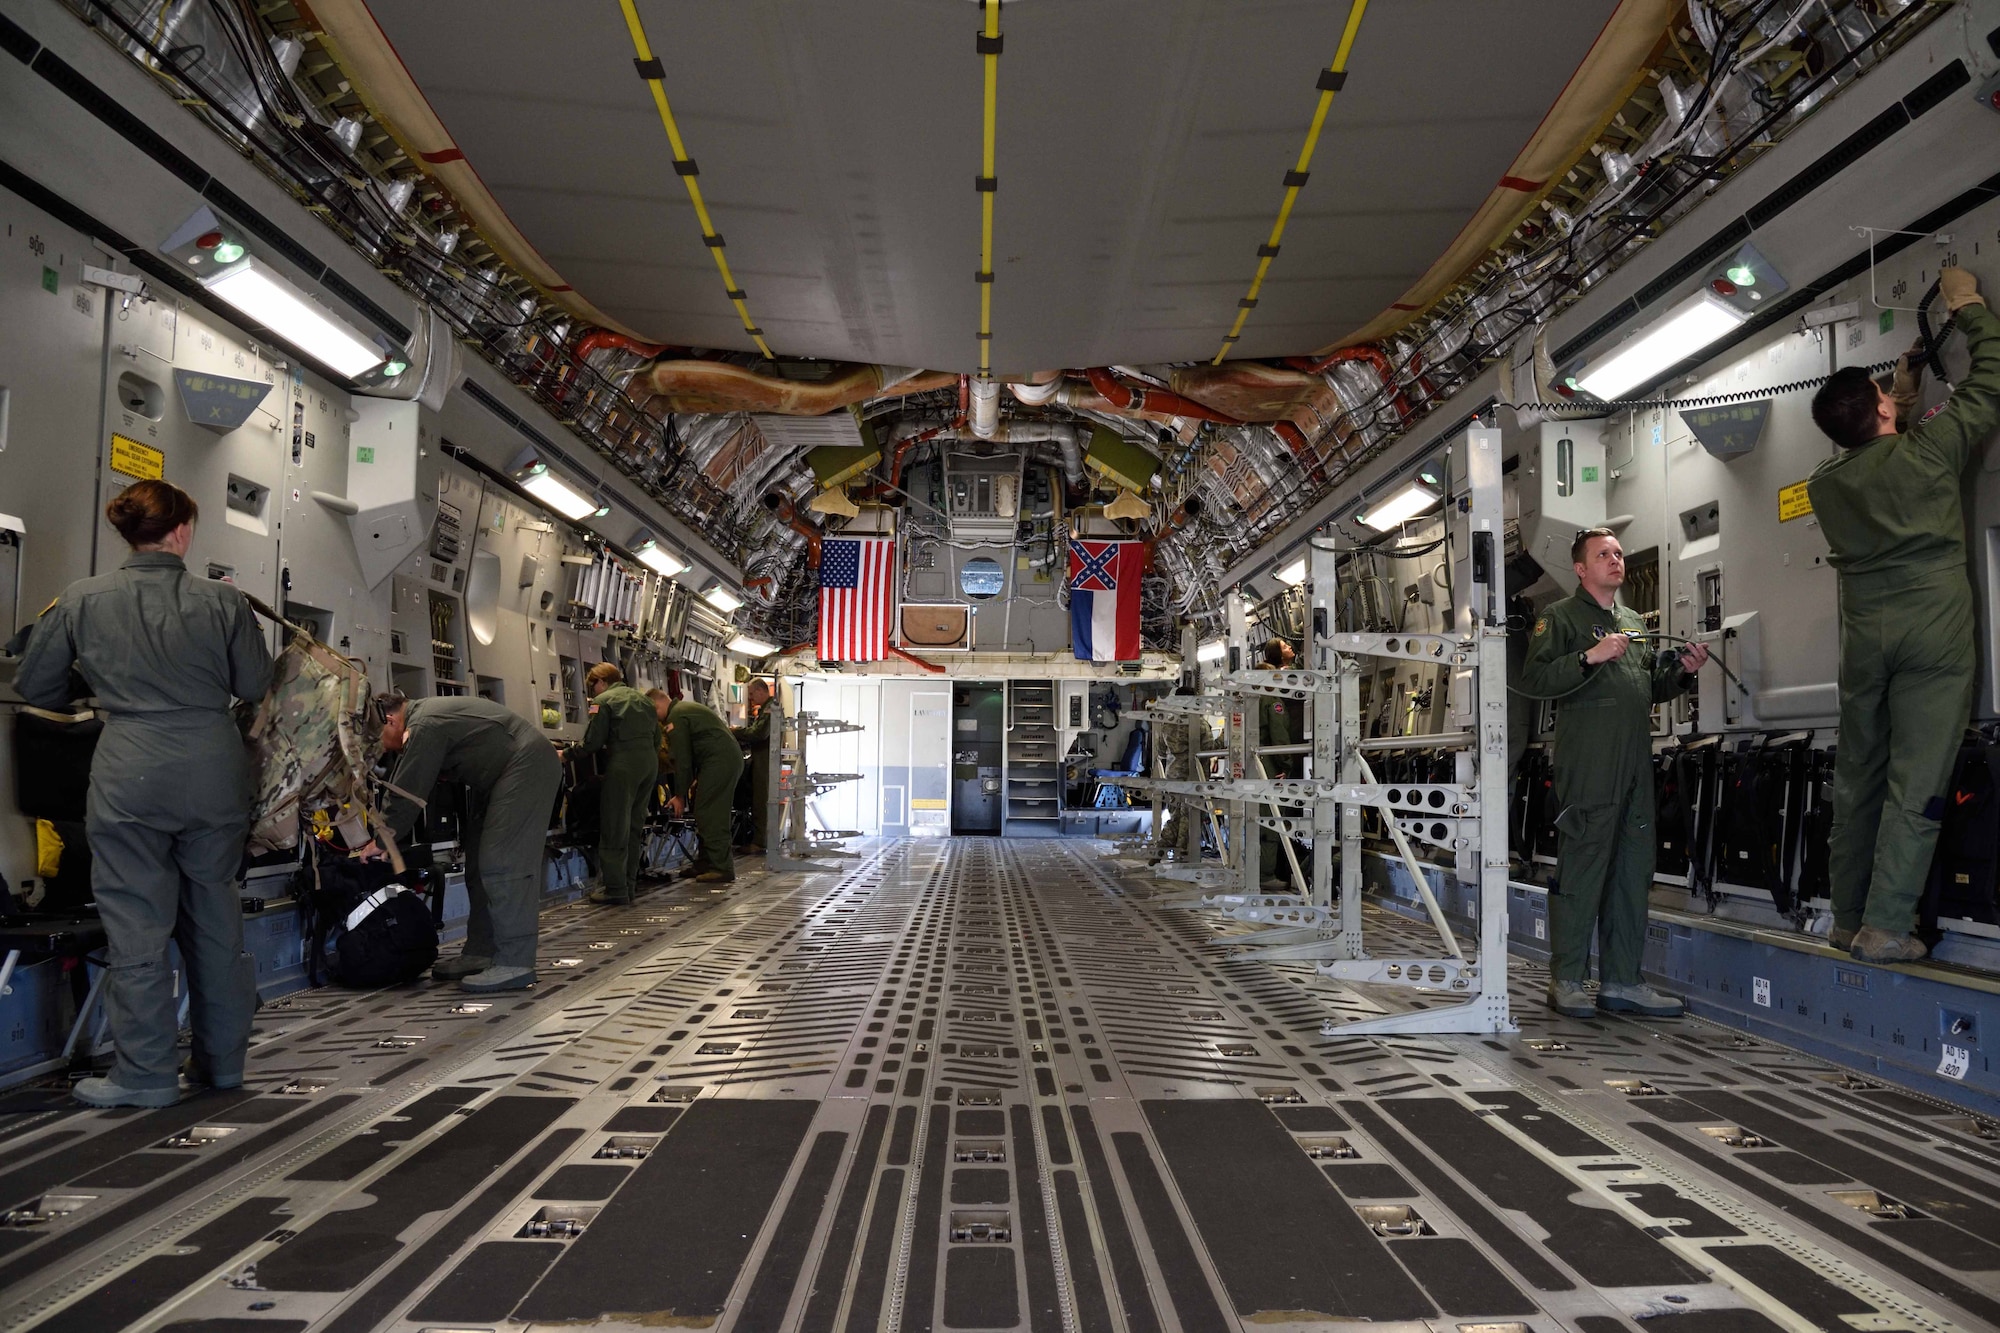 Members of the Air Force Reserve 36th Aeromedical Evacuation Squadron and other Air National Guard units prepare a C-17 Globemaster III aircraft from the 183rd Airlift Squadron to receive simulated patients Oct. 30, 2017, during Southern Strike 2018 at the Gulfport Combat Readiness Training Center, Mississippi. Southern Strike 2018 is a large-scale, joint multinational combat exercise that provides tactical level training for the full spectrum of conflict and emphasizes air dominance, maritime operations, maritime air support, precision engagement, close air support, command and control, personnel recovery, aeromedical evacuation, and combat medical support. (U.S. Air Force photo by Tech. Sgt. Ryan Labadens)